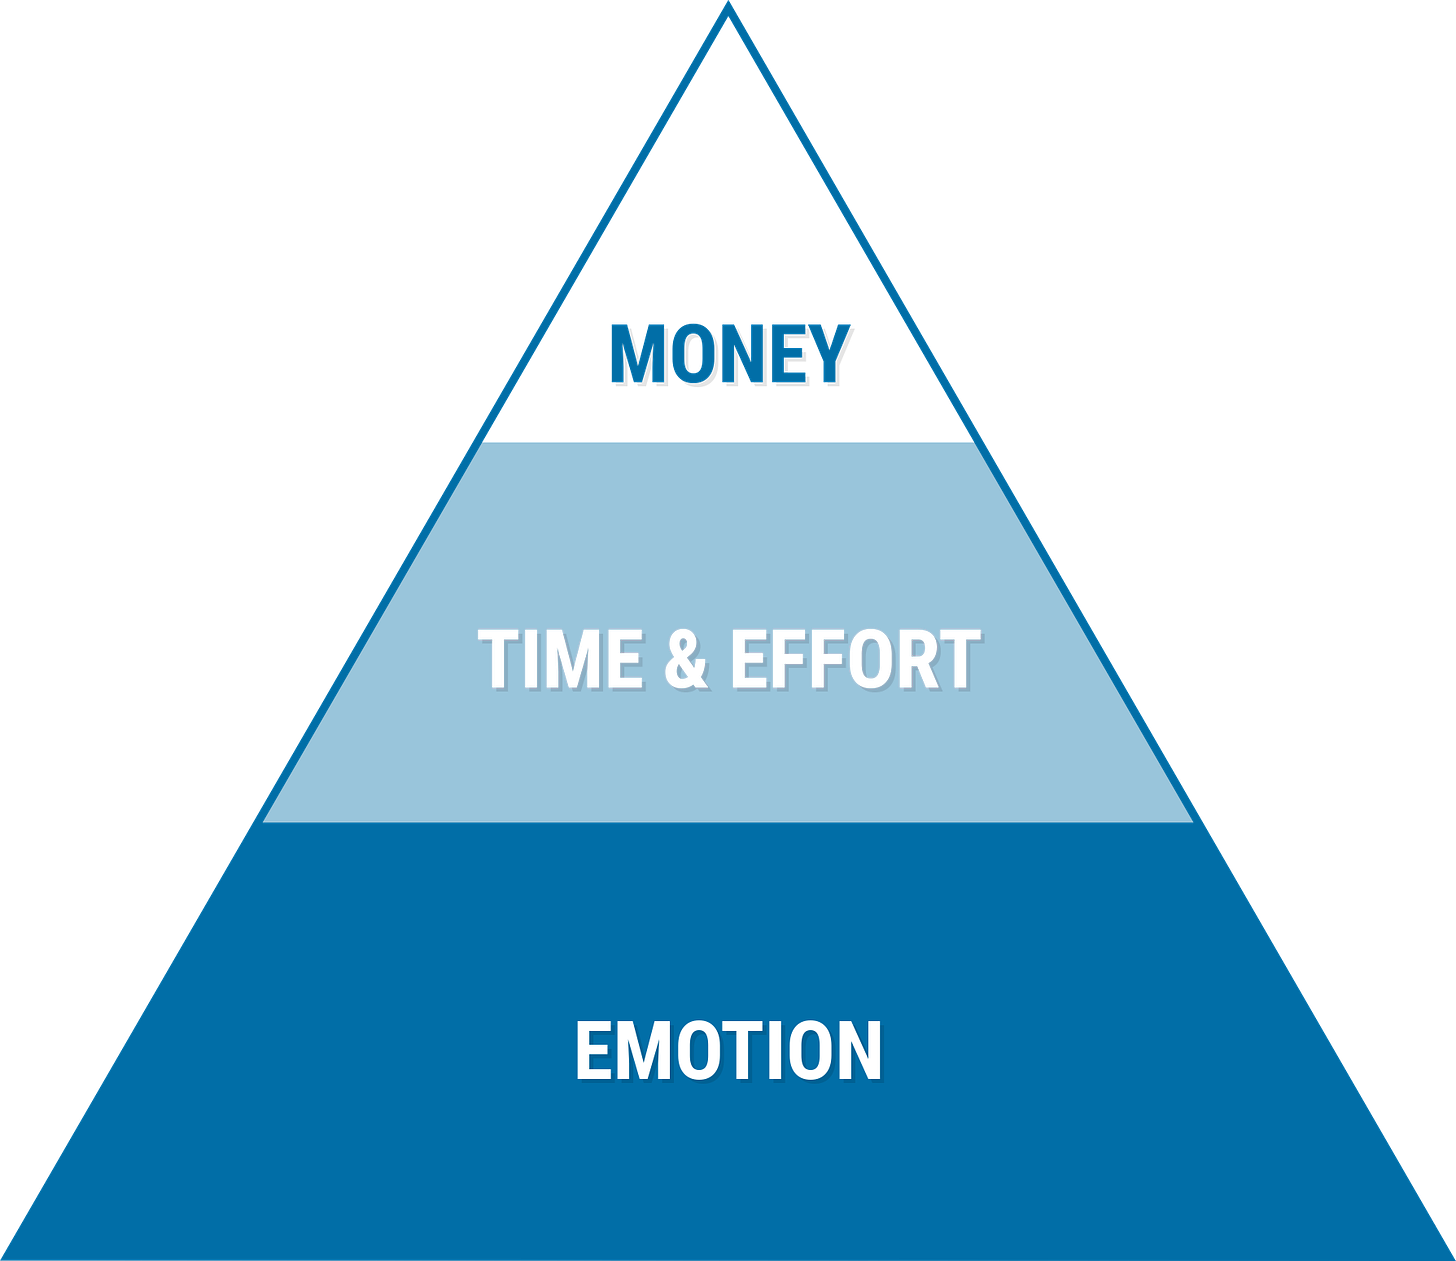 The value pyramid: emotion at the bottom, then time, then money